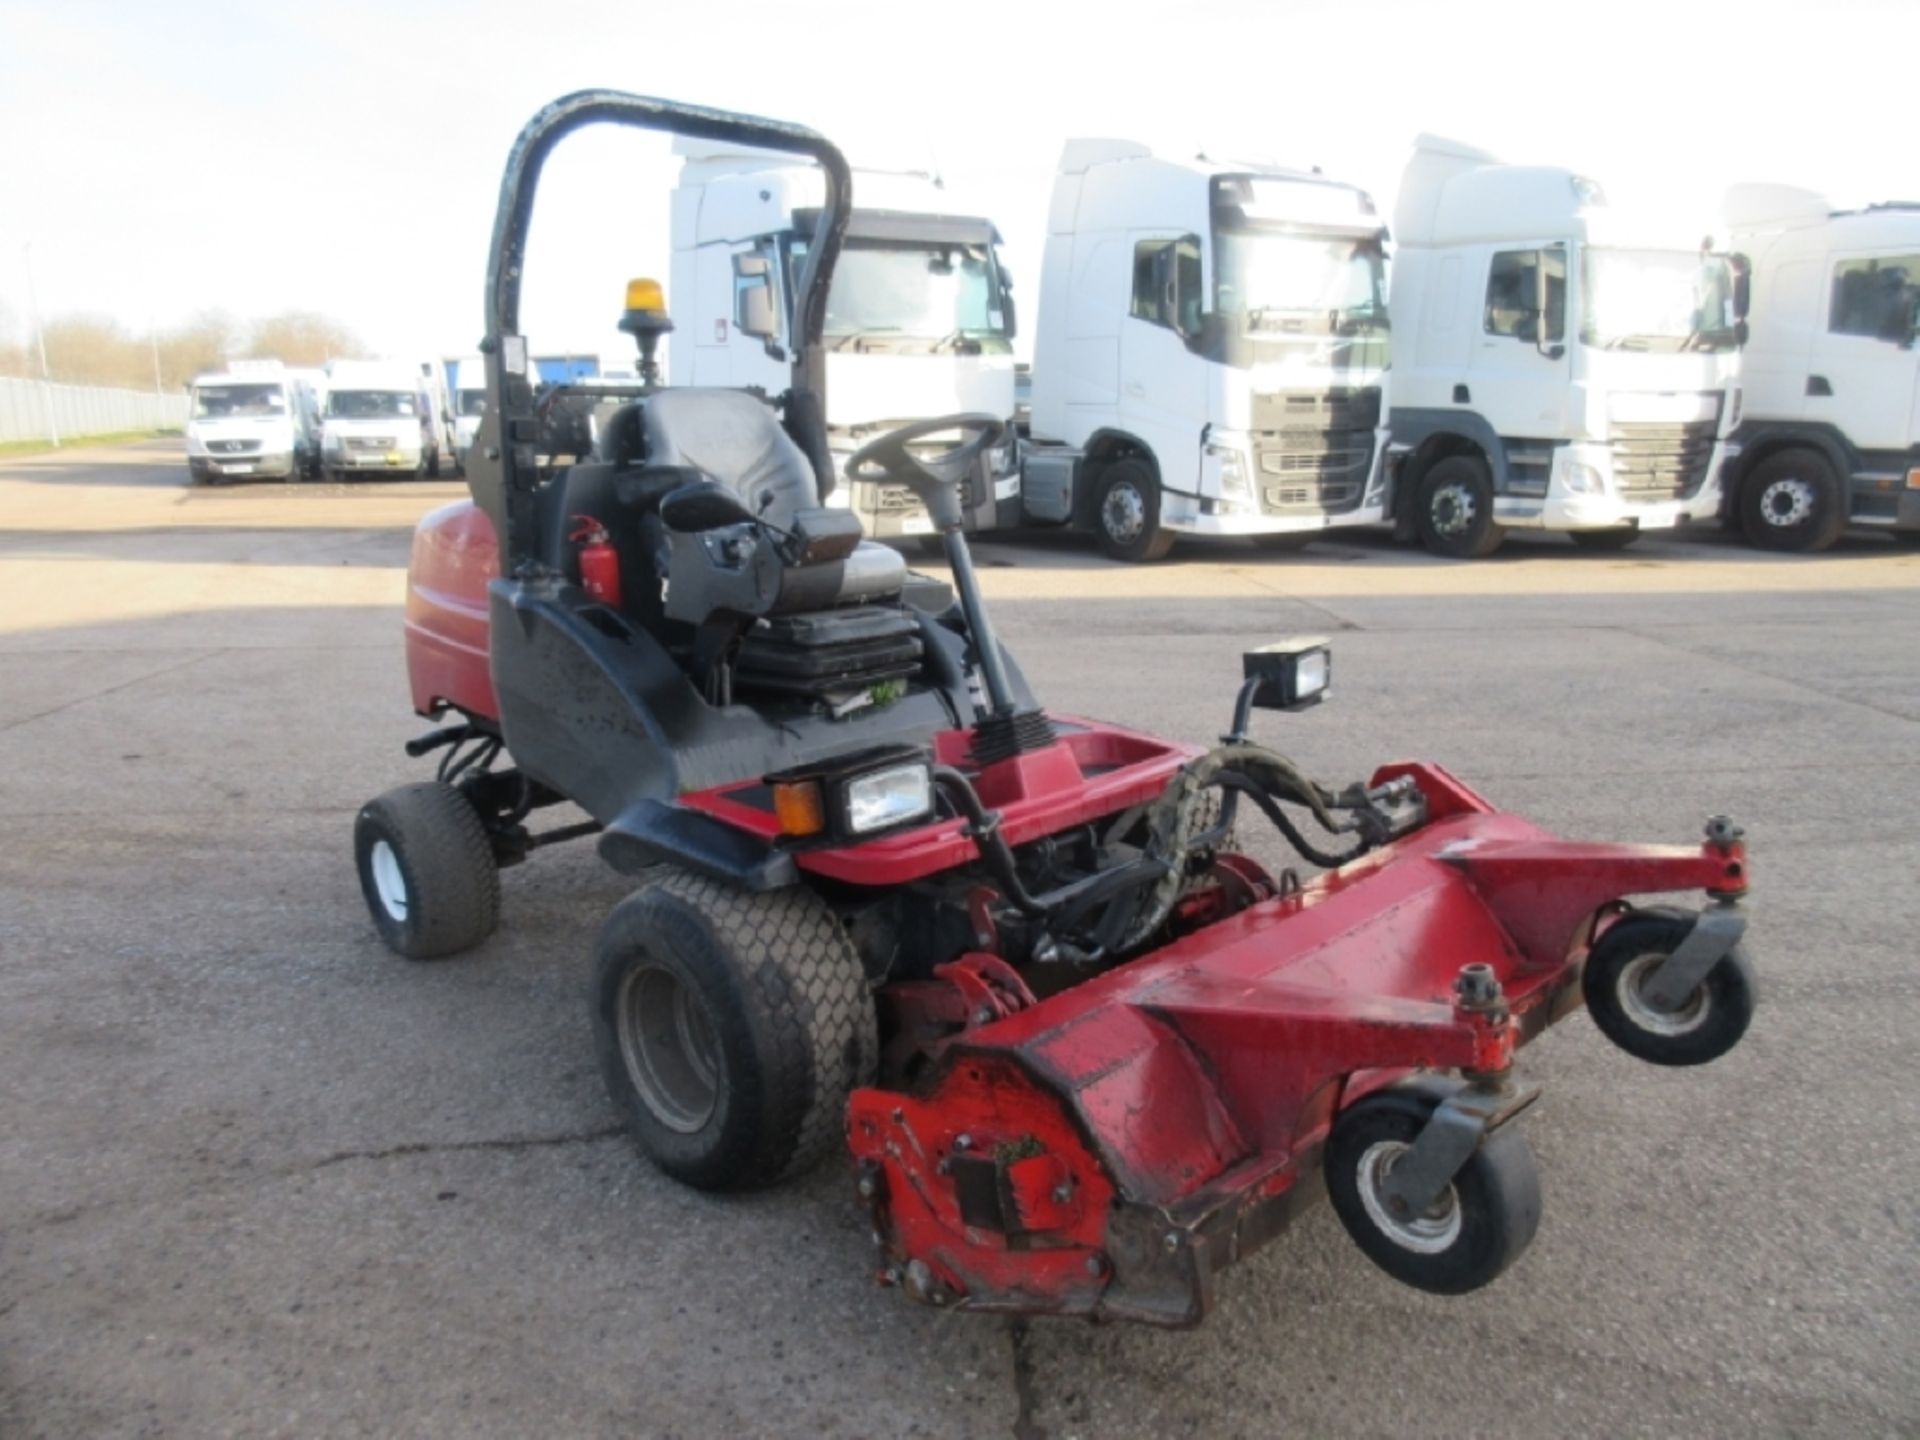 TORO GM3400 - 1498cc Plant Diesel Automatic - VIN: 30651314000111 - Year: 2015 - 2,123 Hours - - Image 2 of 8